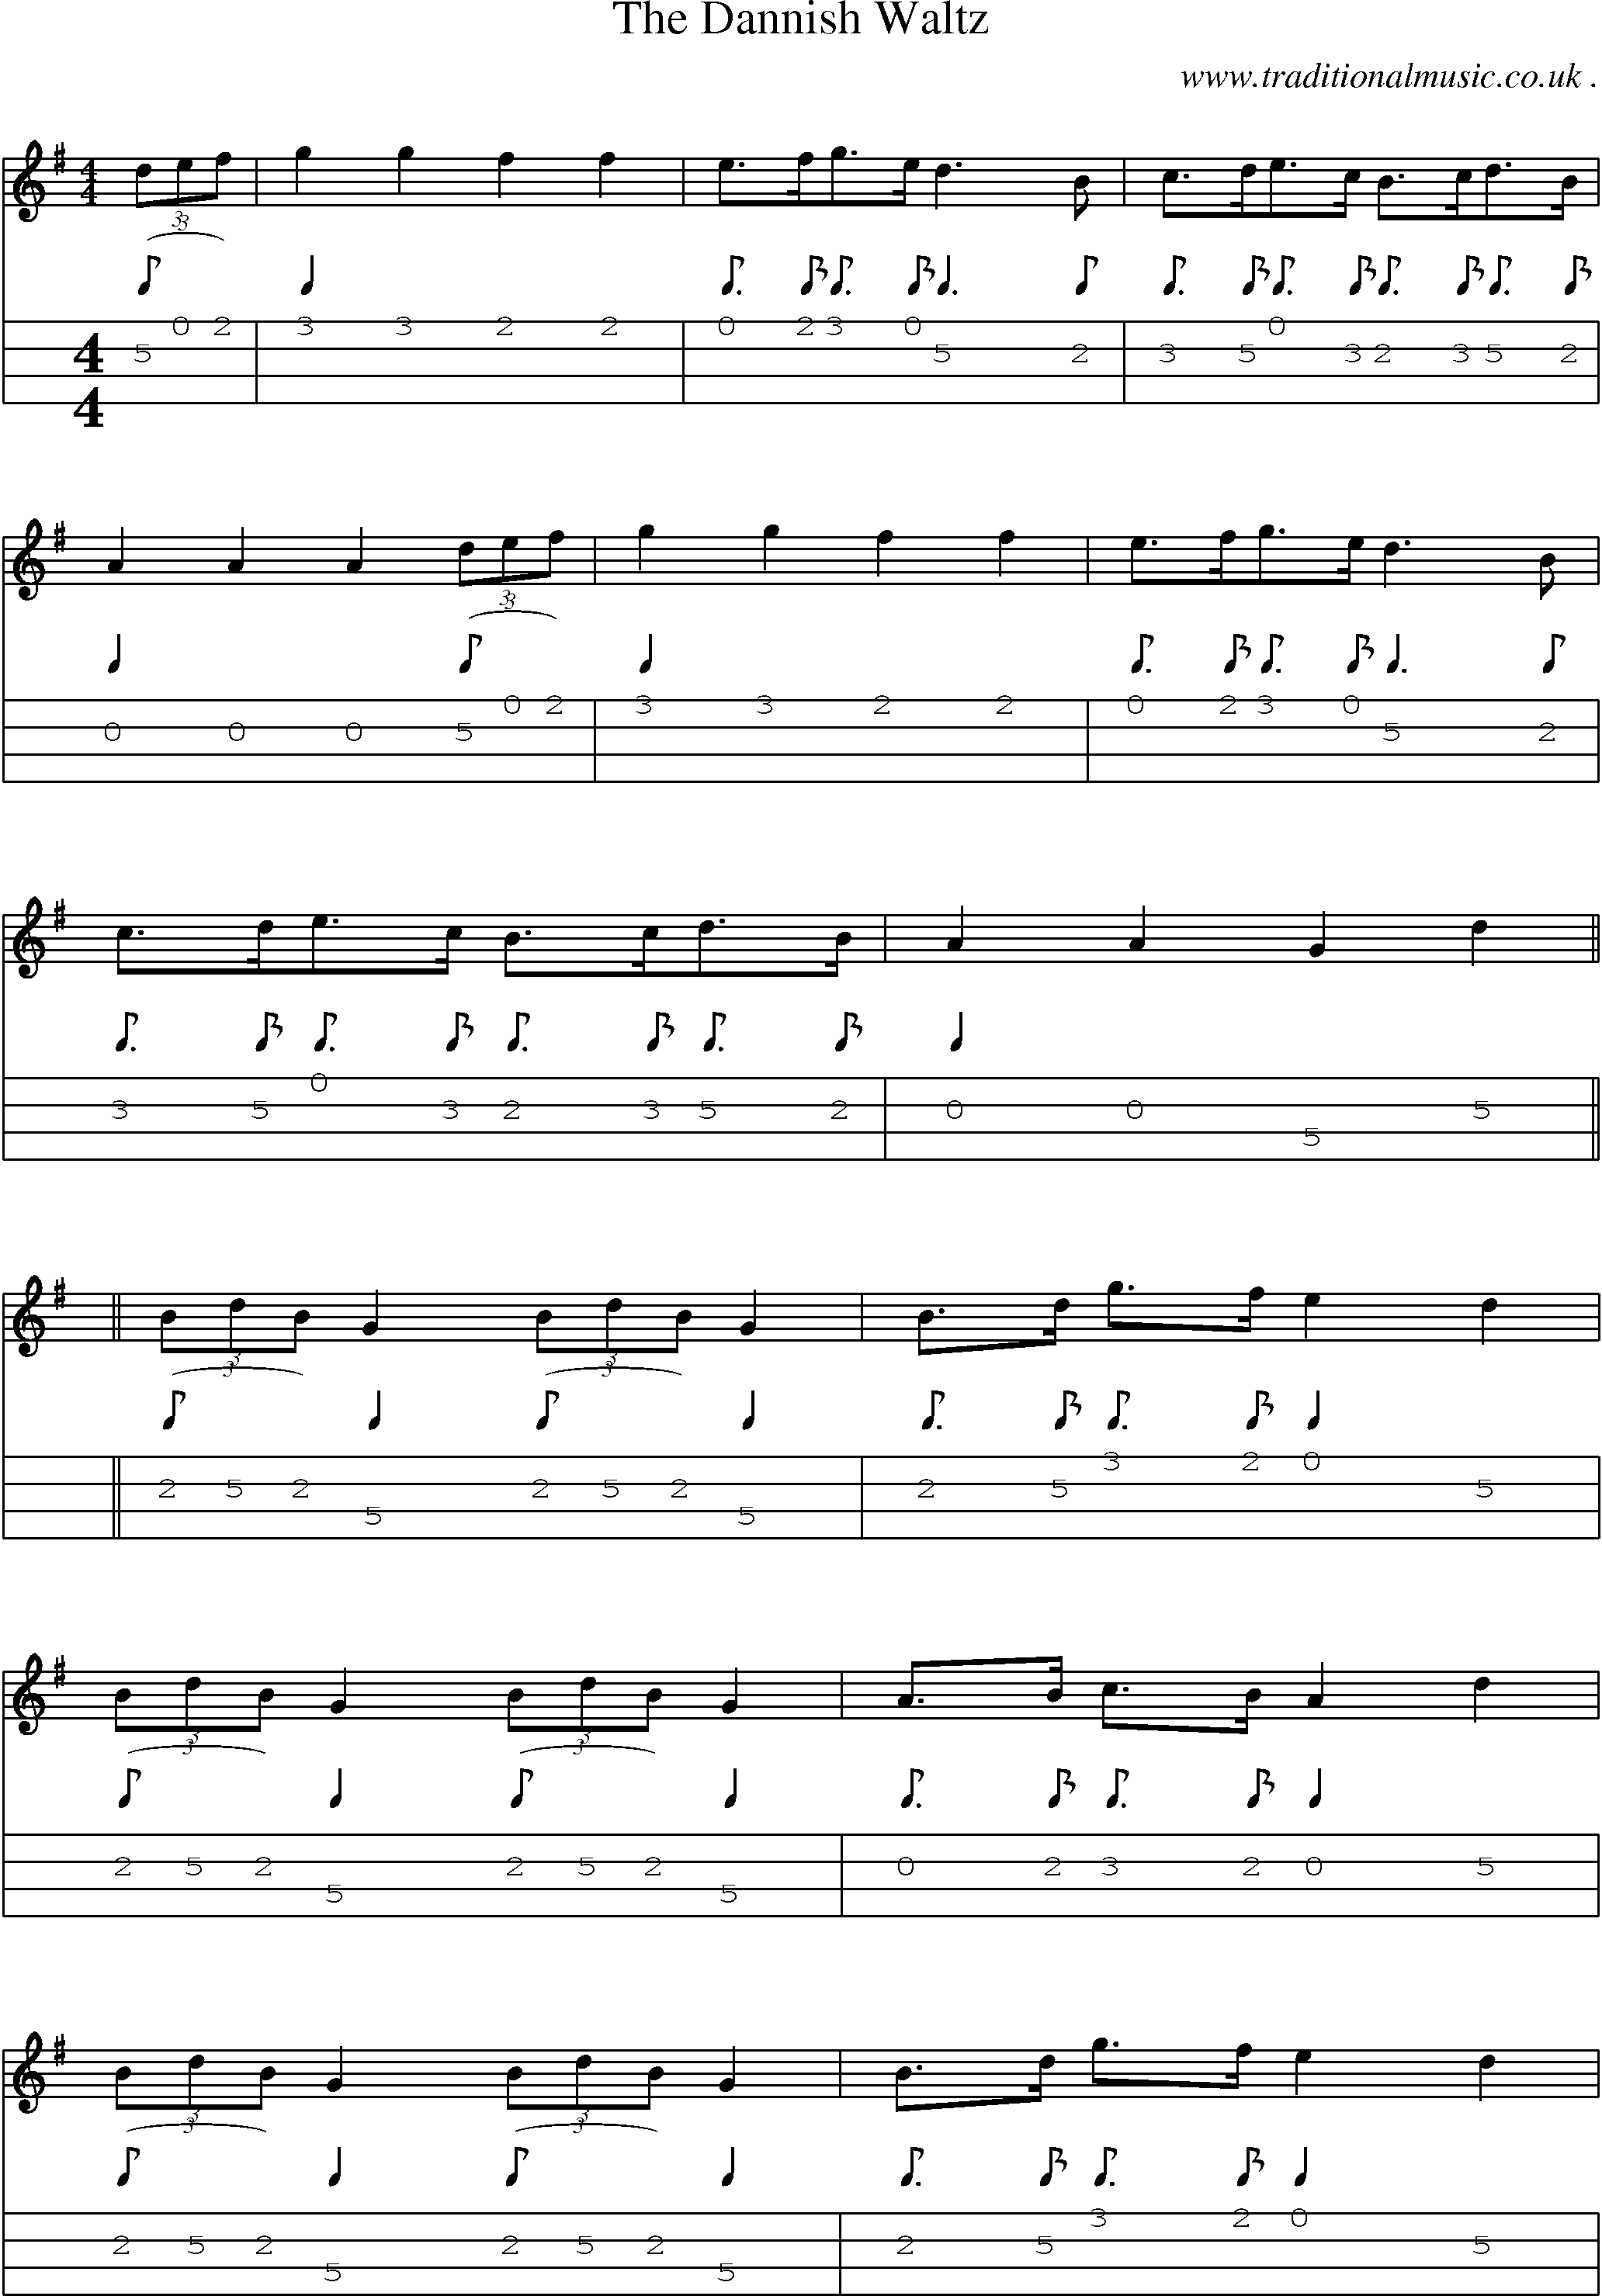 Sheet-Music and Mandolin Tabs for The Dannish Waltz